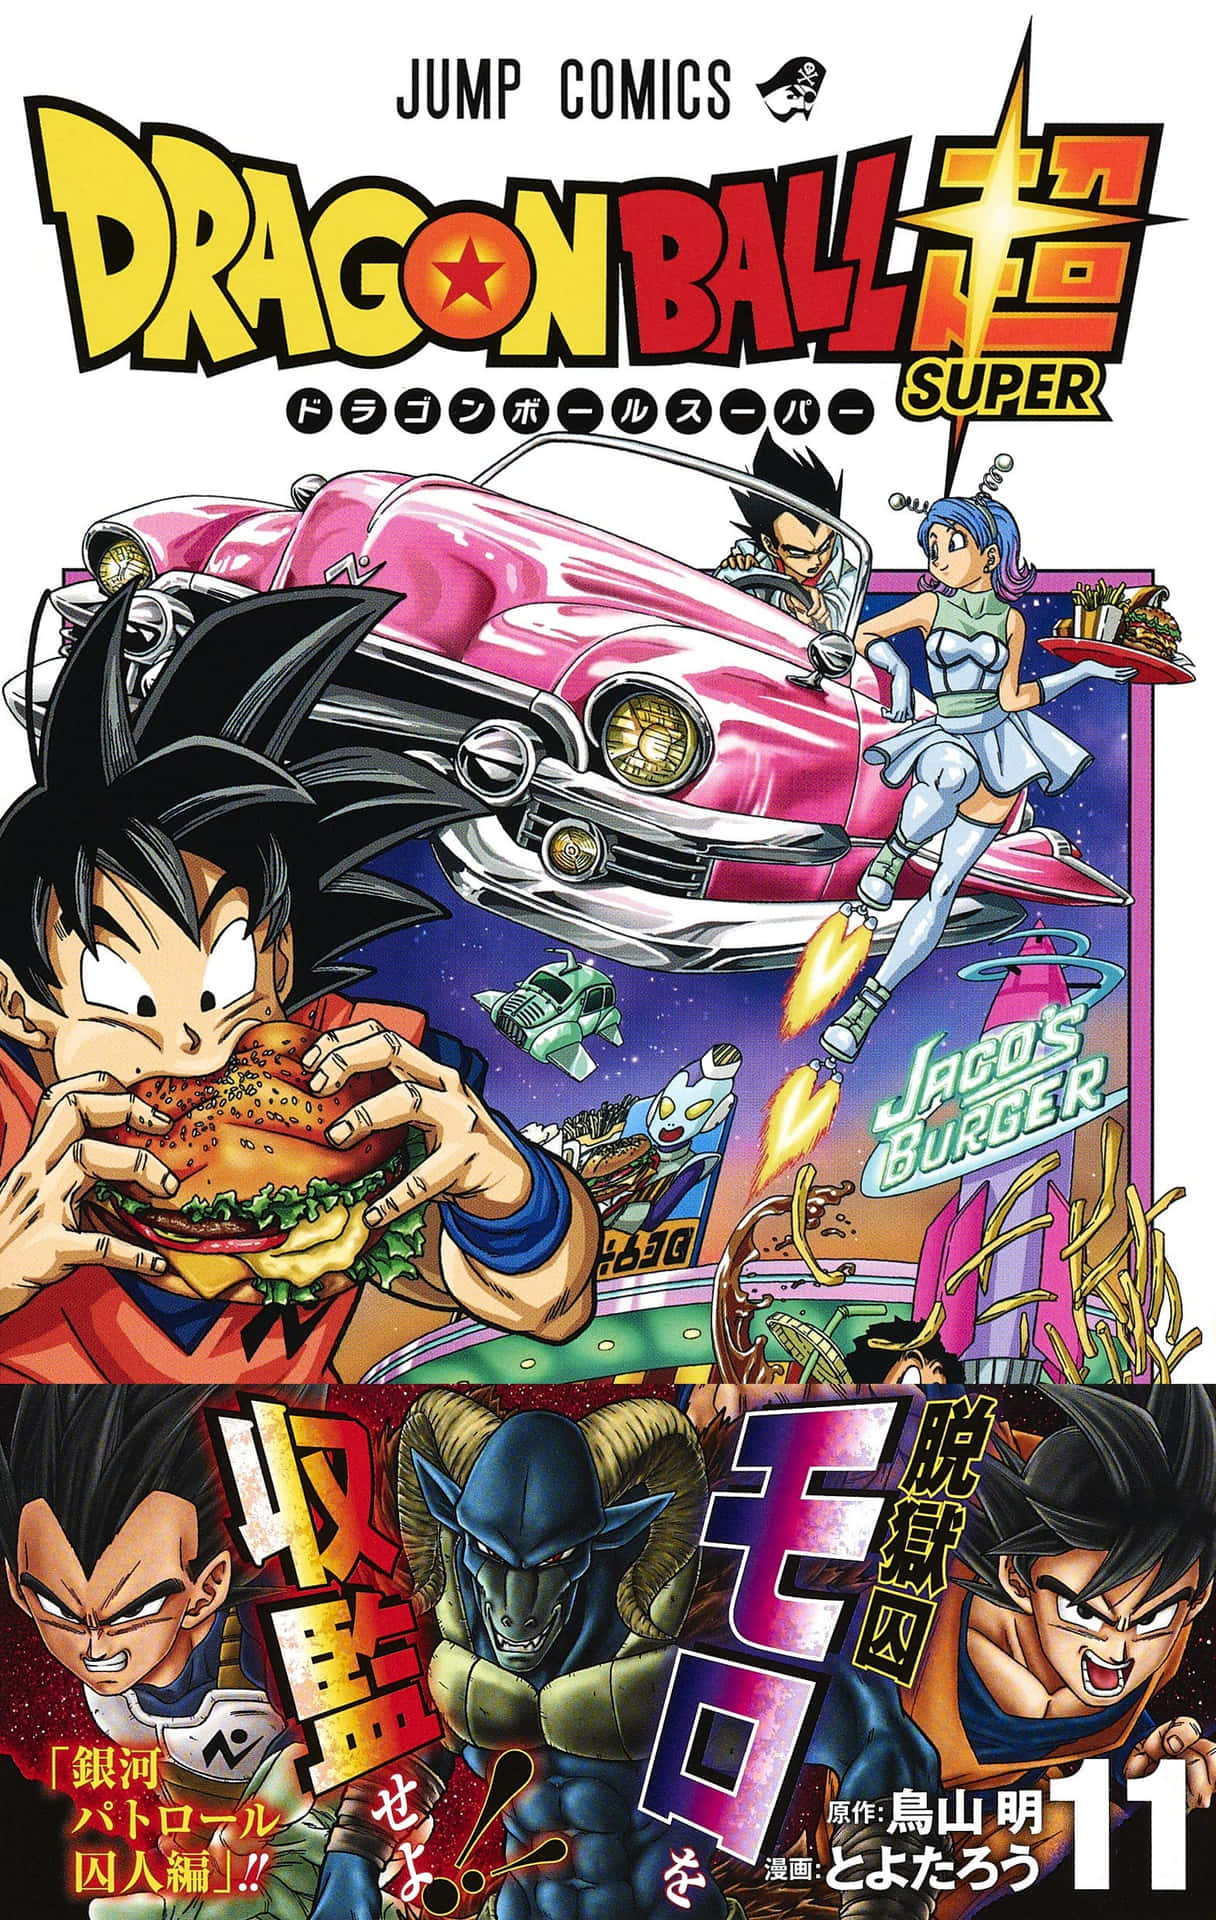 Get ready for a wild adventure with the Dragon Ball Super Manga! Wallpaper